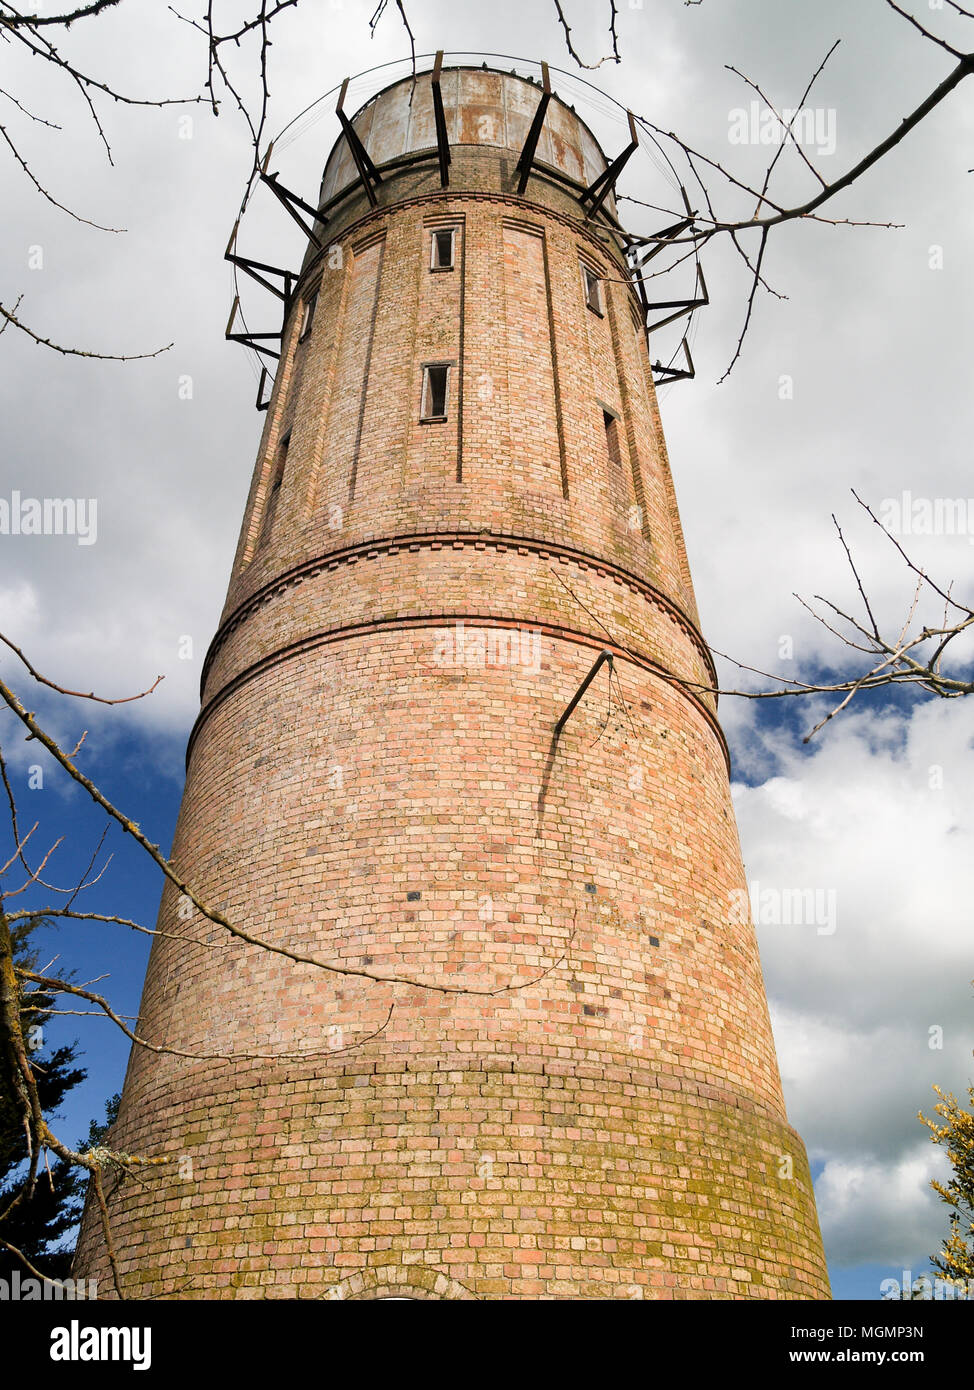 Cambridge landmark from point of view tall orange brick water tower on outskirts of town, New Zealand Stock Photo